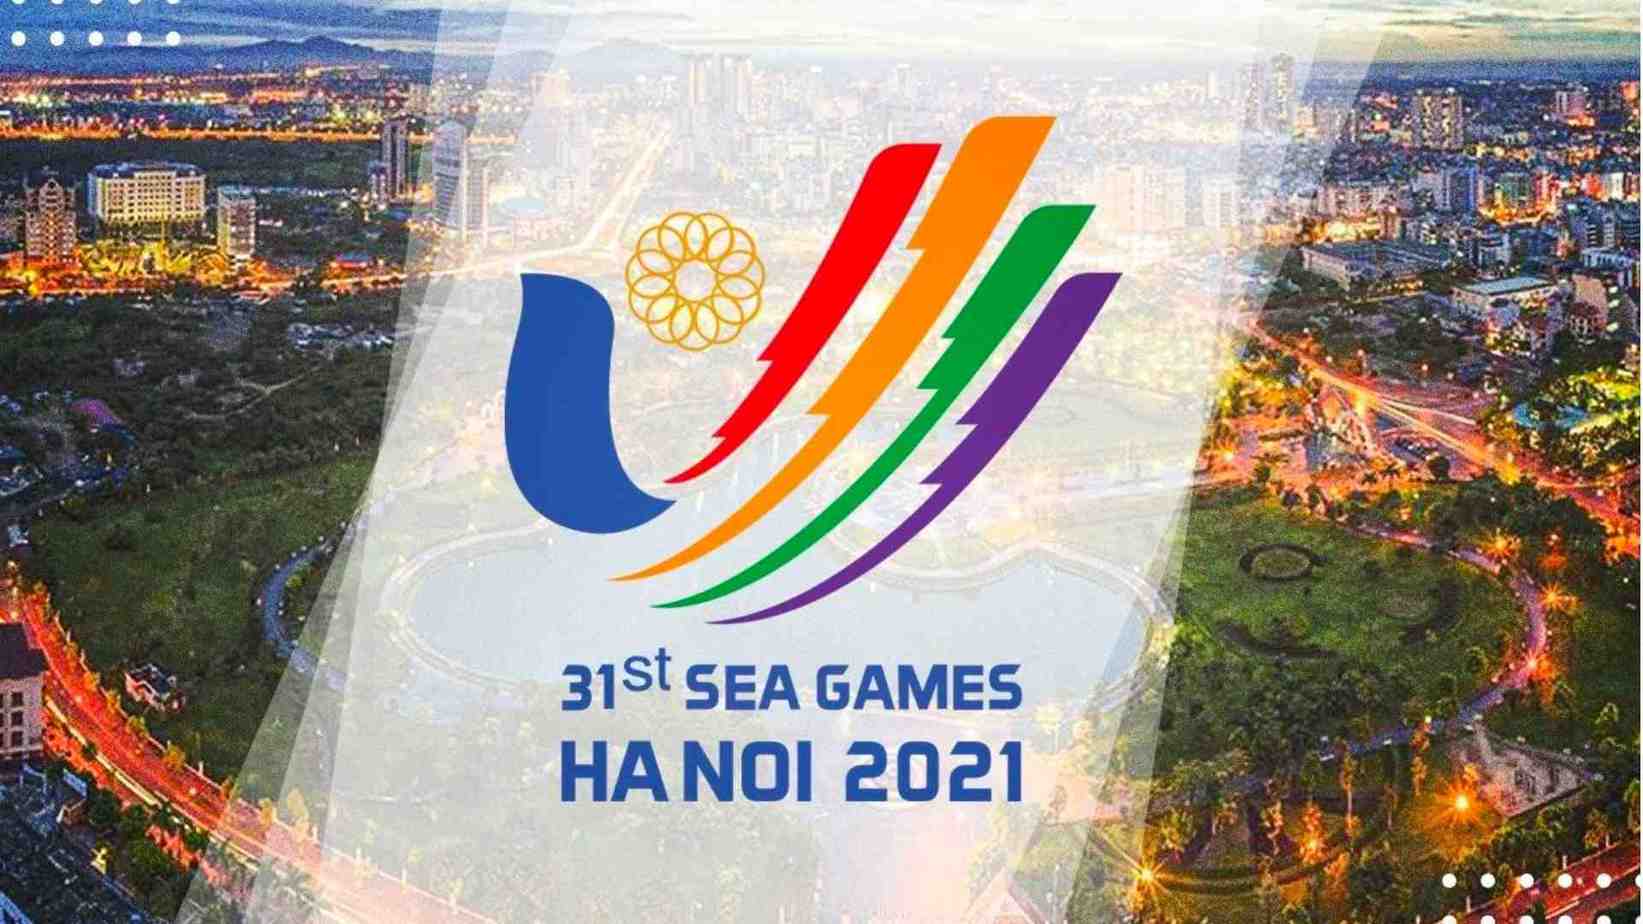 Complete 31st SEA Games schedule for all esports titles